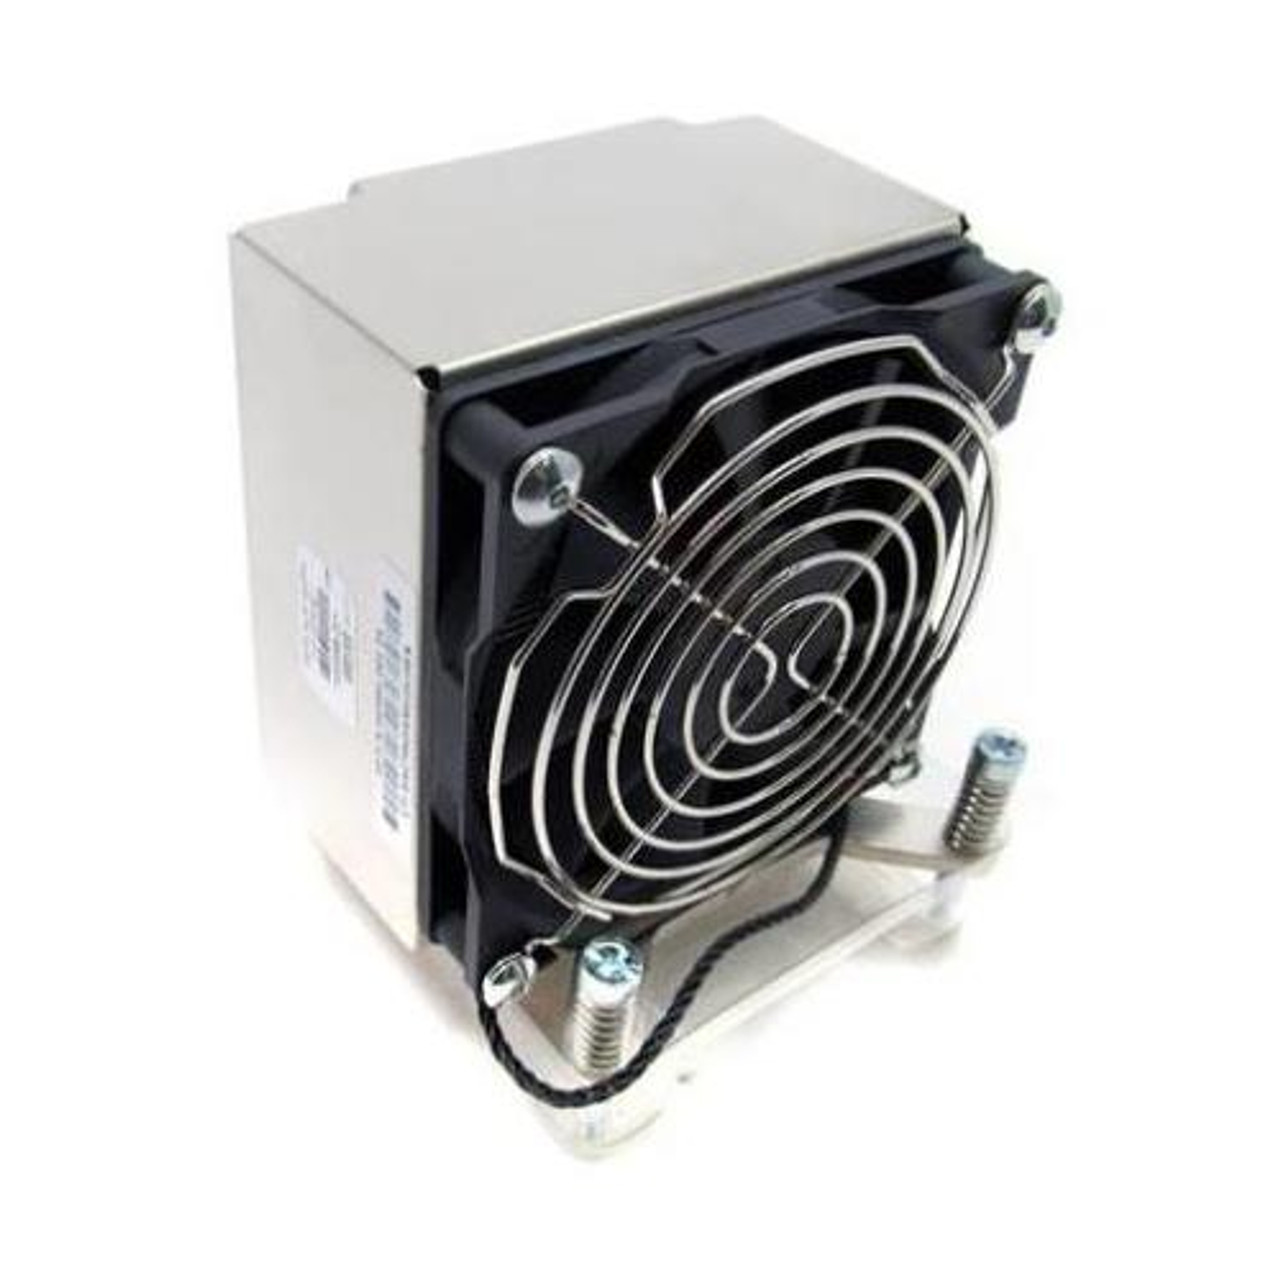 001 Hp Cpu Heatsink And Cooling Fan Assembly For Proliant Ml110 G6 Server